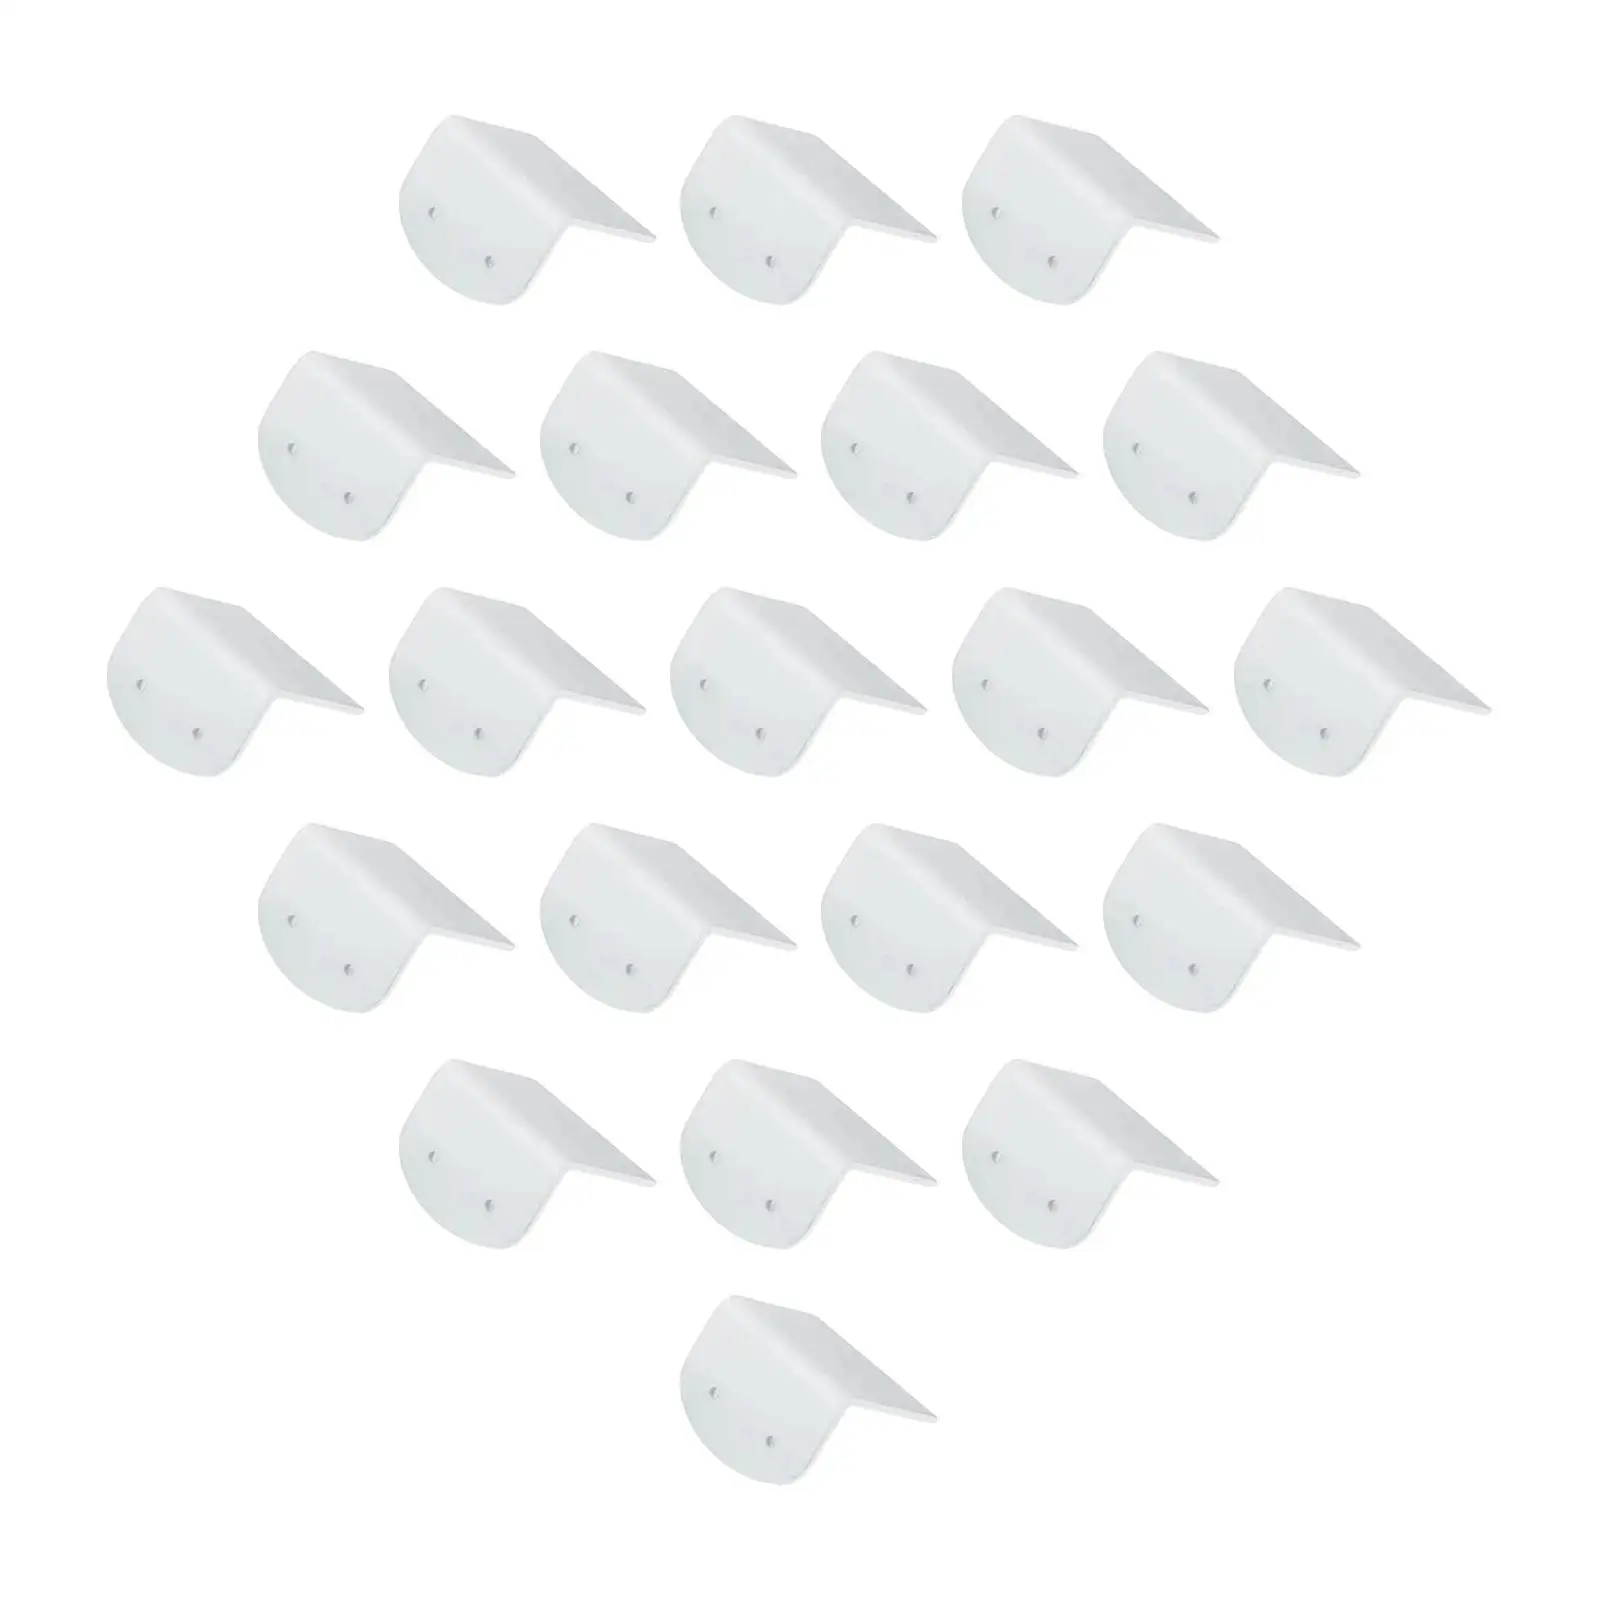 20 Pieces Acrylic Earring Display Cards White Accessory Durable Lightweight Portable for DIY Crafts Showcase Retail store